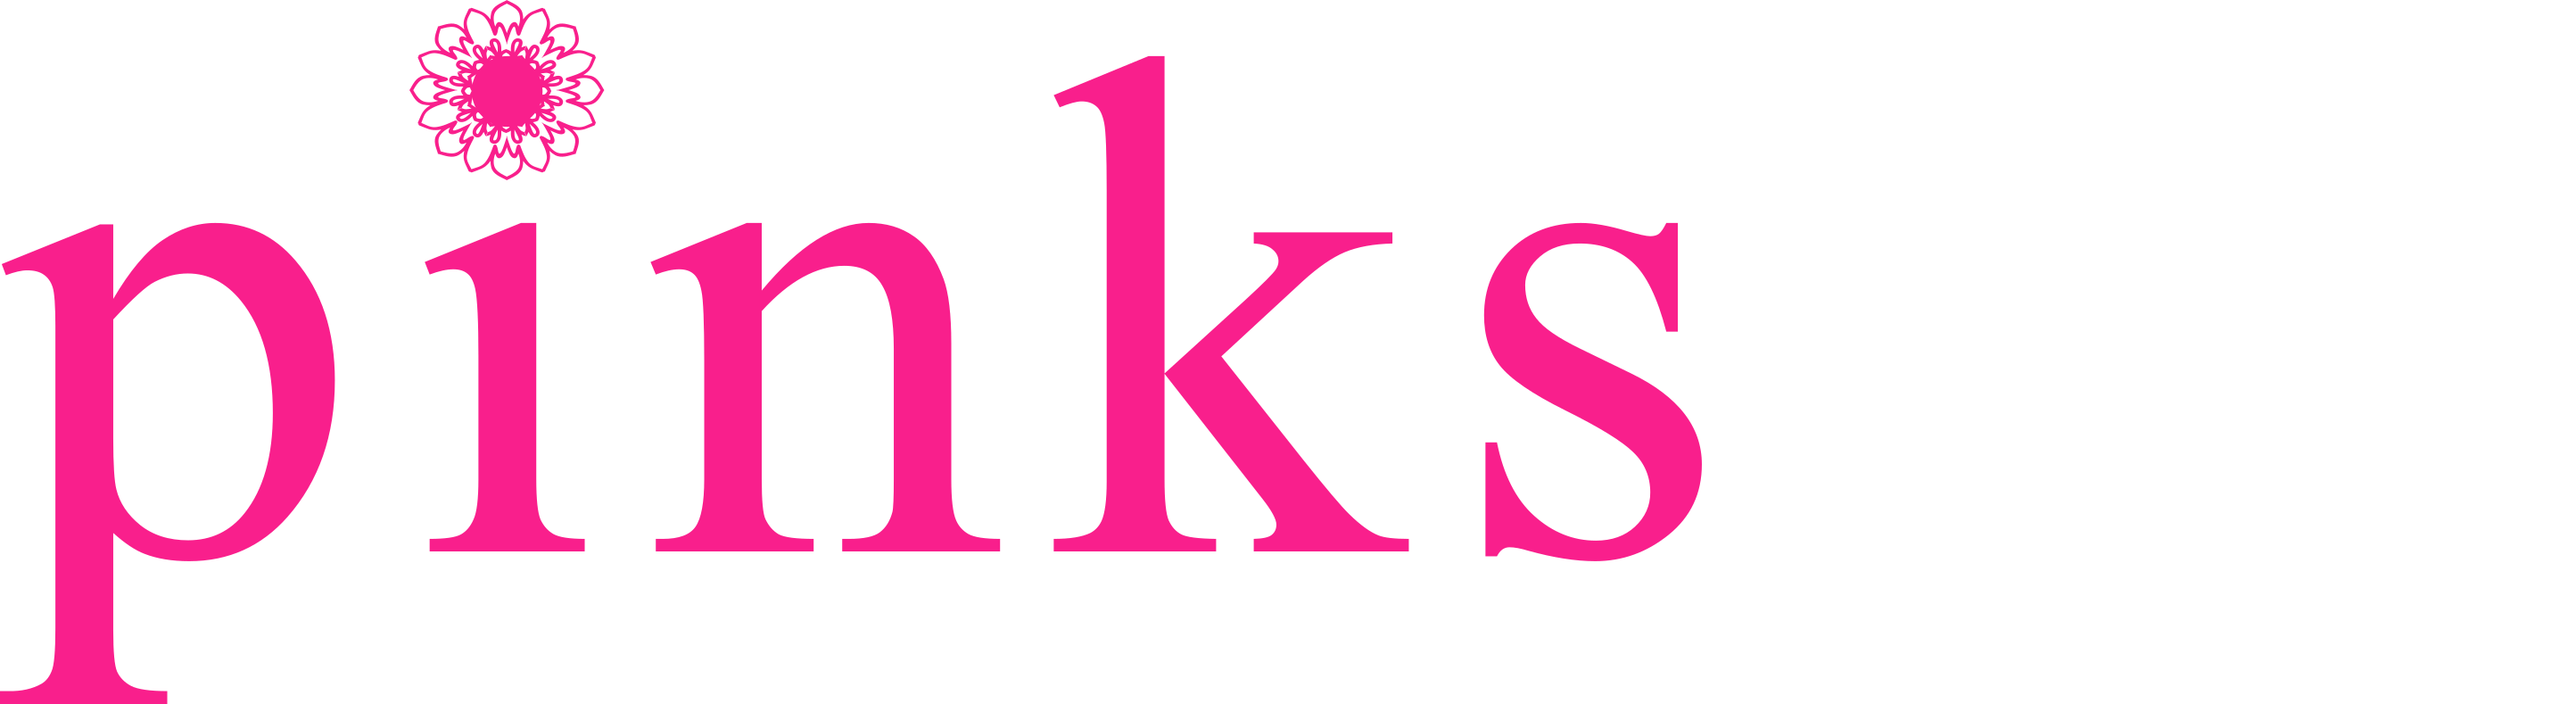 Pink's Logo - Pinks.co Beauty Salon Burnley | Exceptional Beauty, Nail, Makeup ...